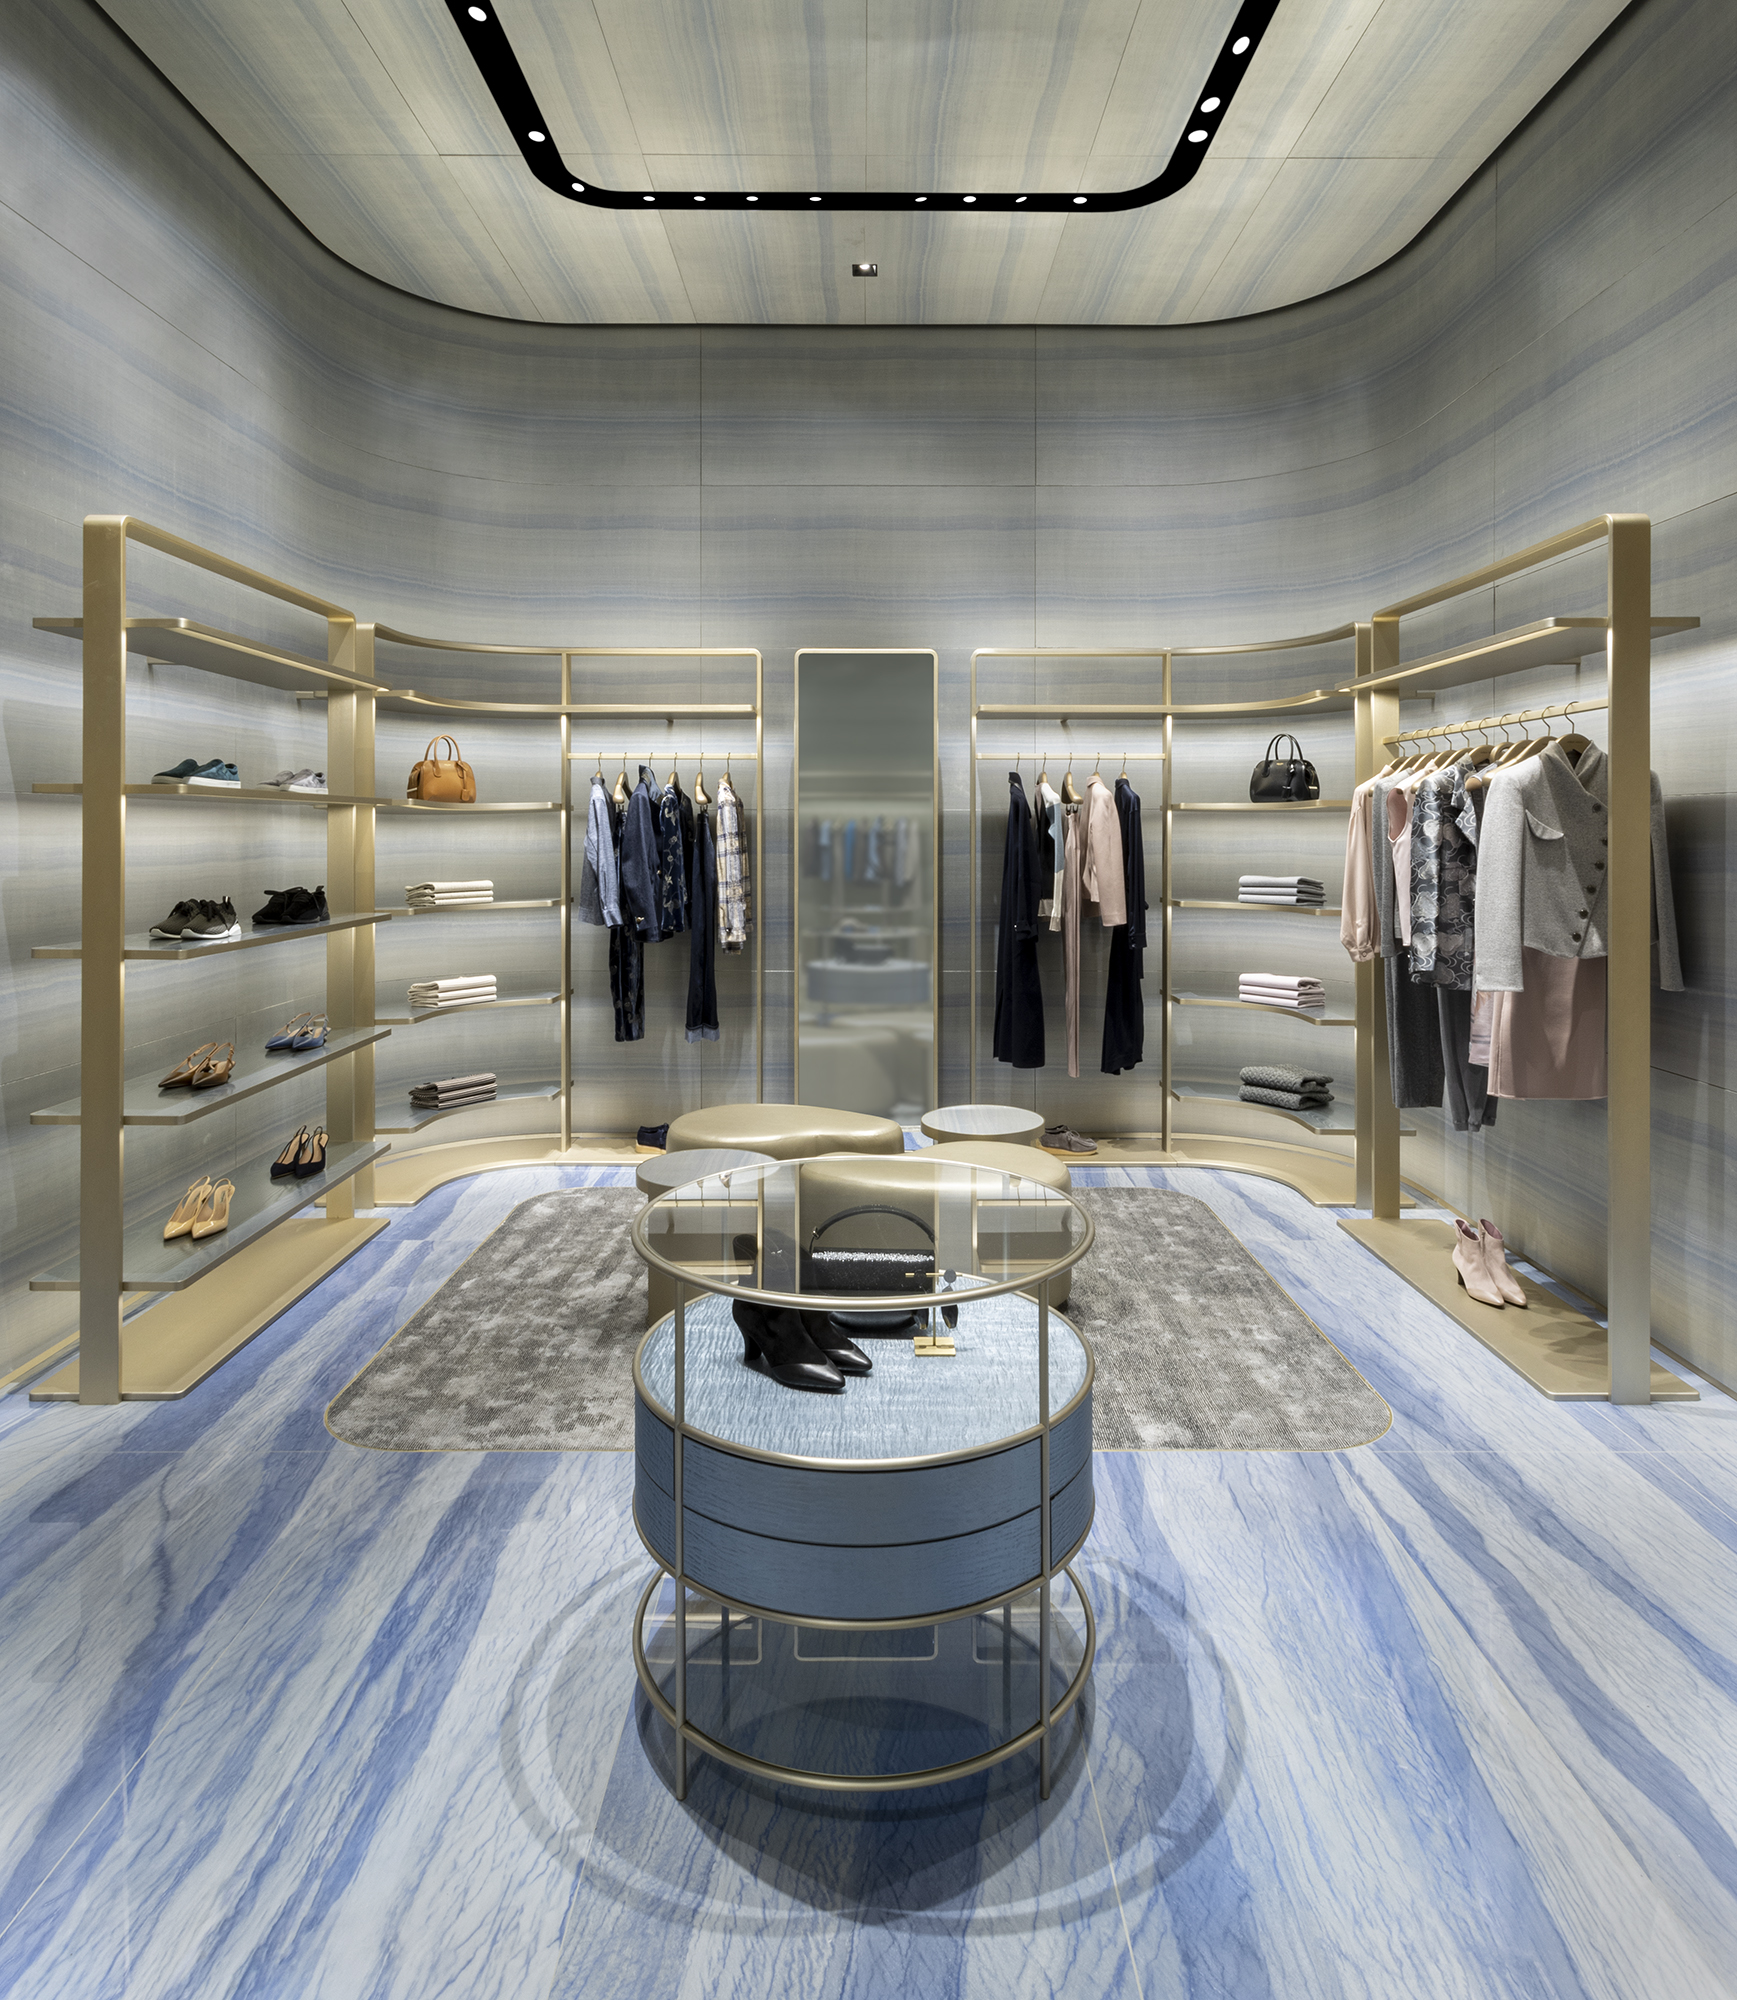 Giorgio Armani Has Opened Its First DC Boutique